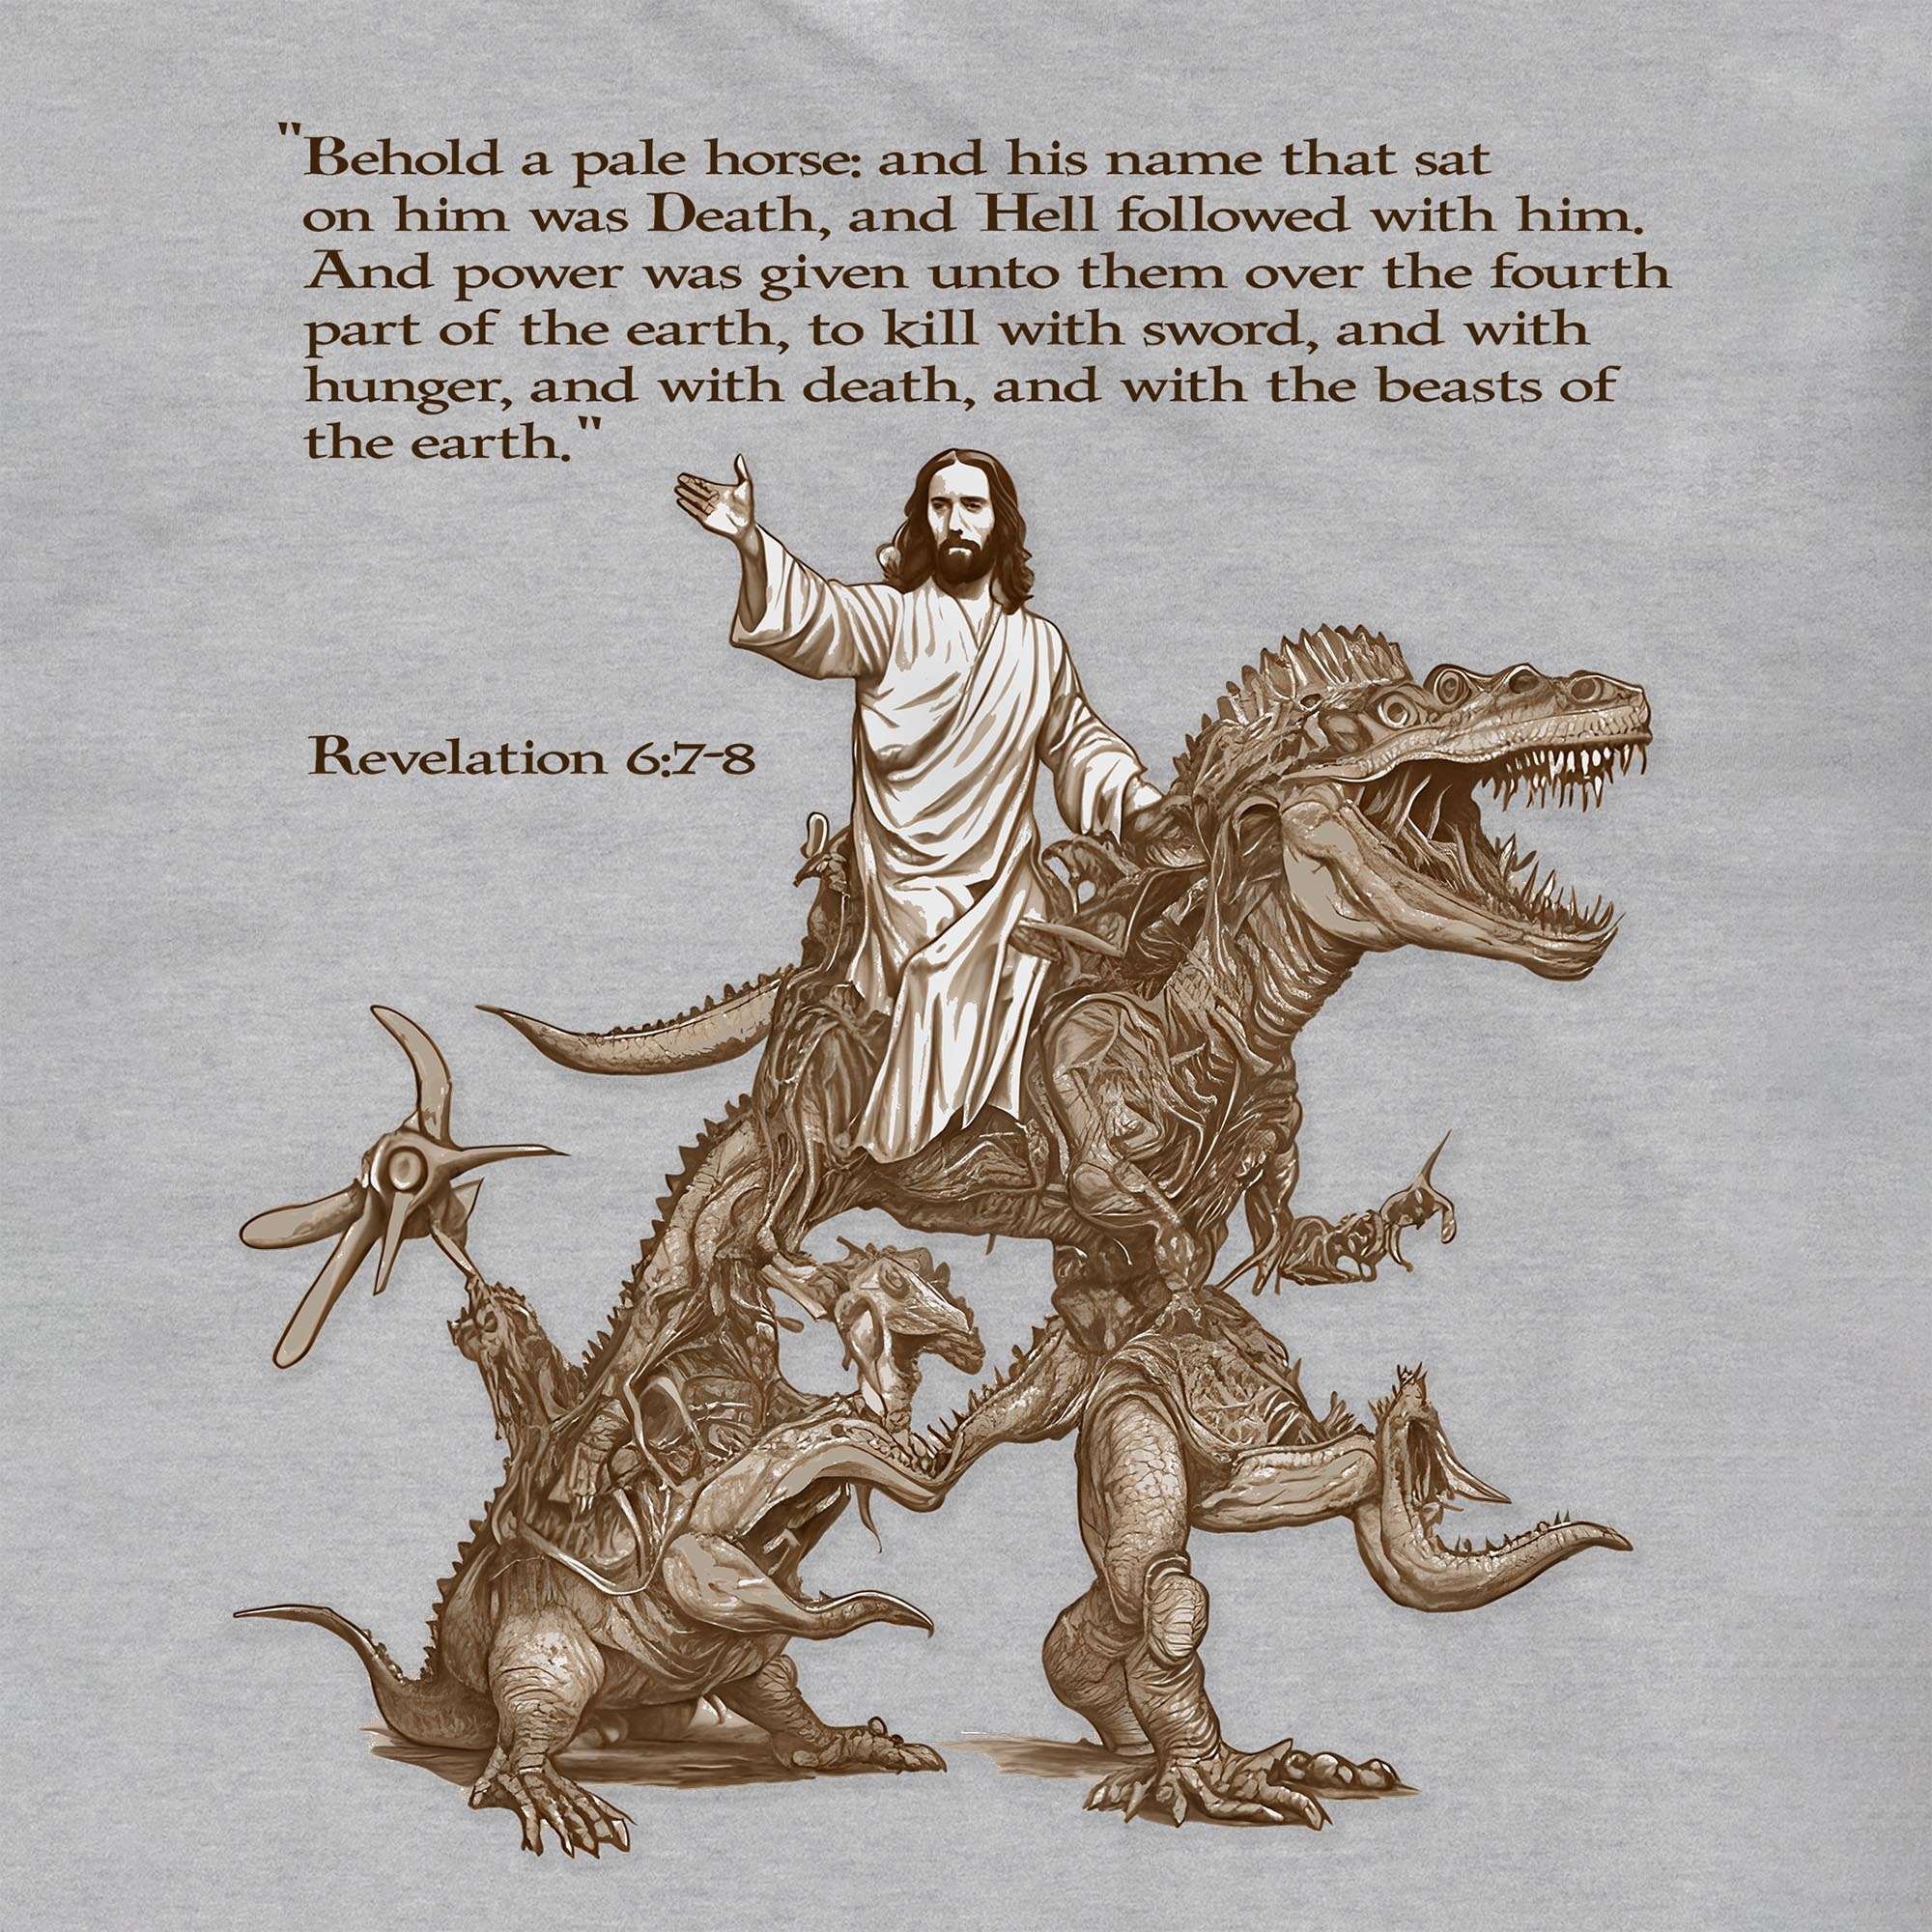 Armageddon: Wrathful Jesus Returns with His Alien Army, The Second Coming, Apocalypse Graphic Art T-Shirt - Sacred Surreal